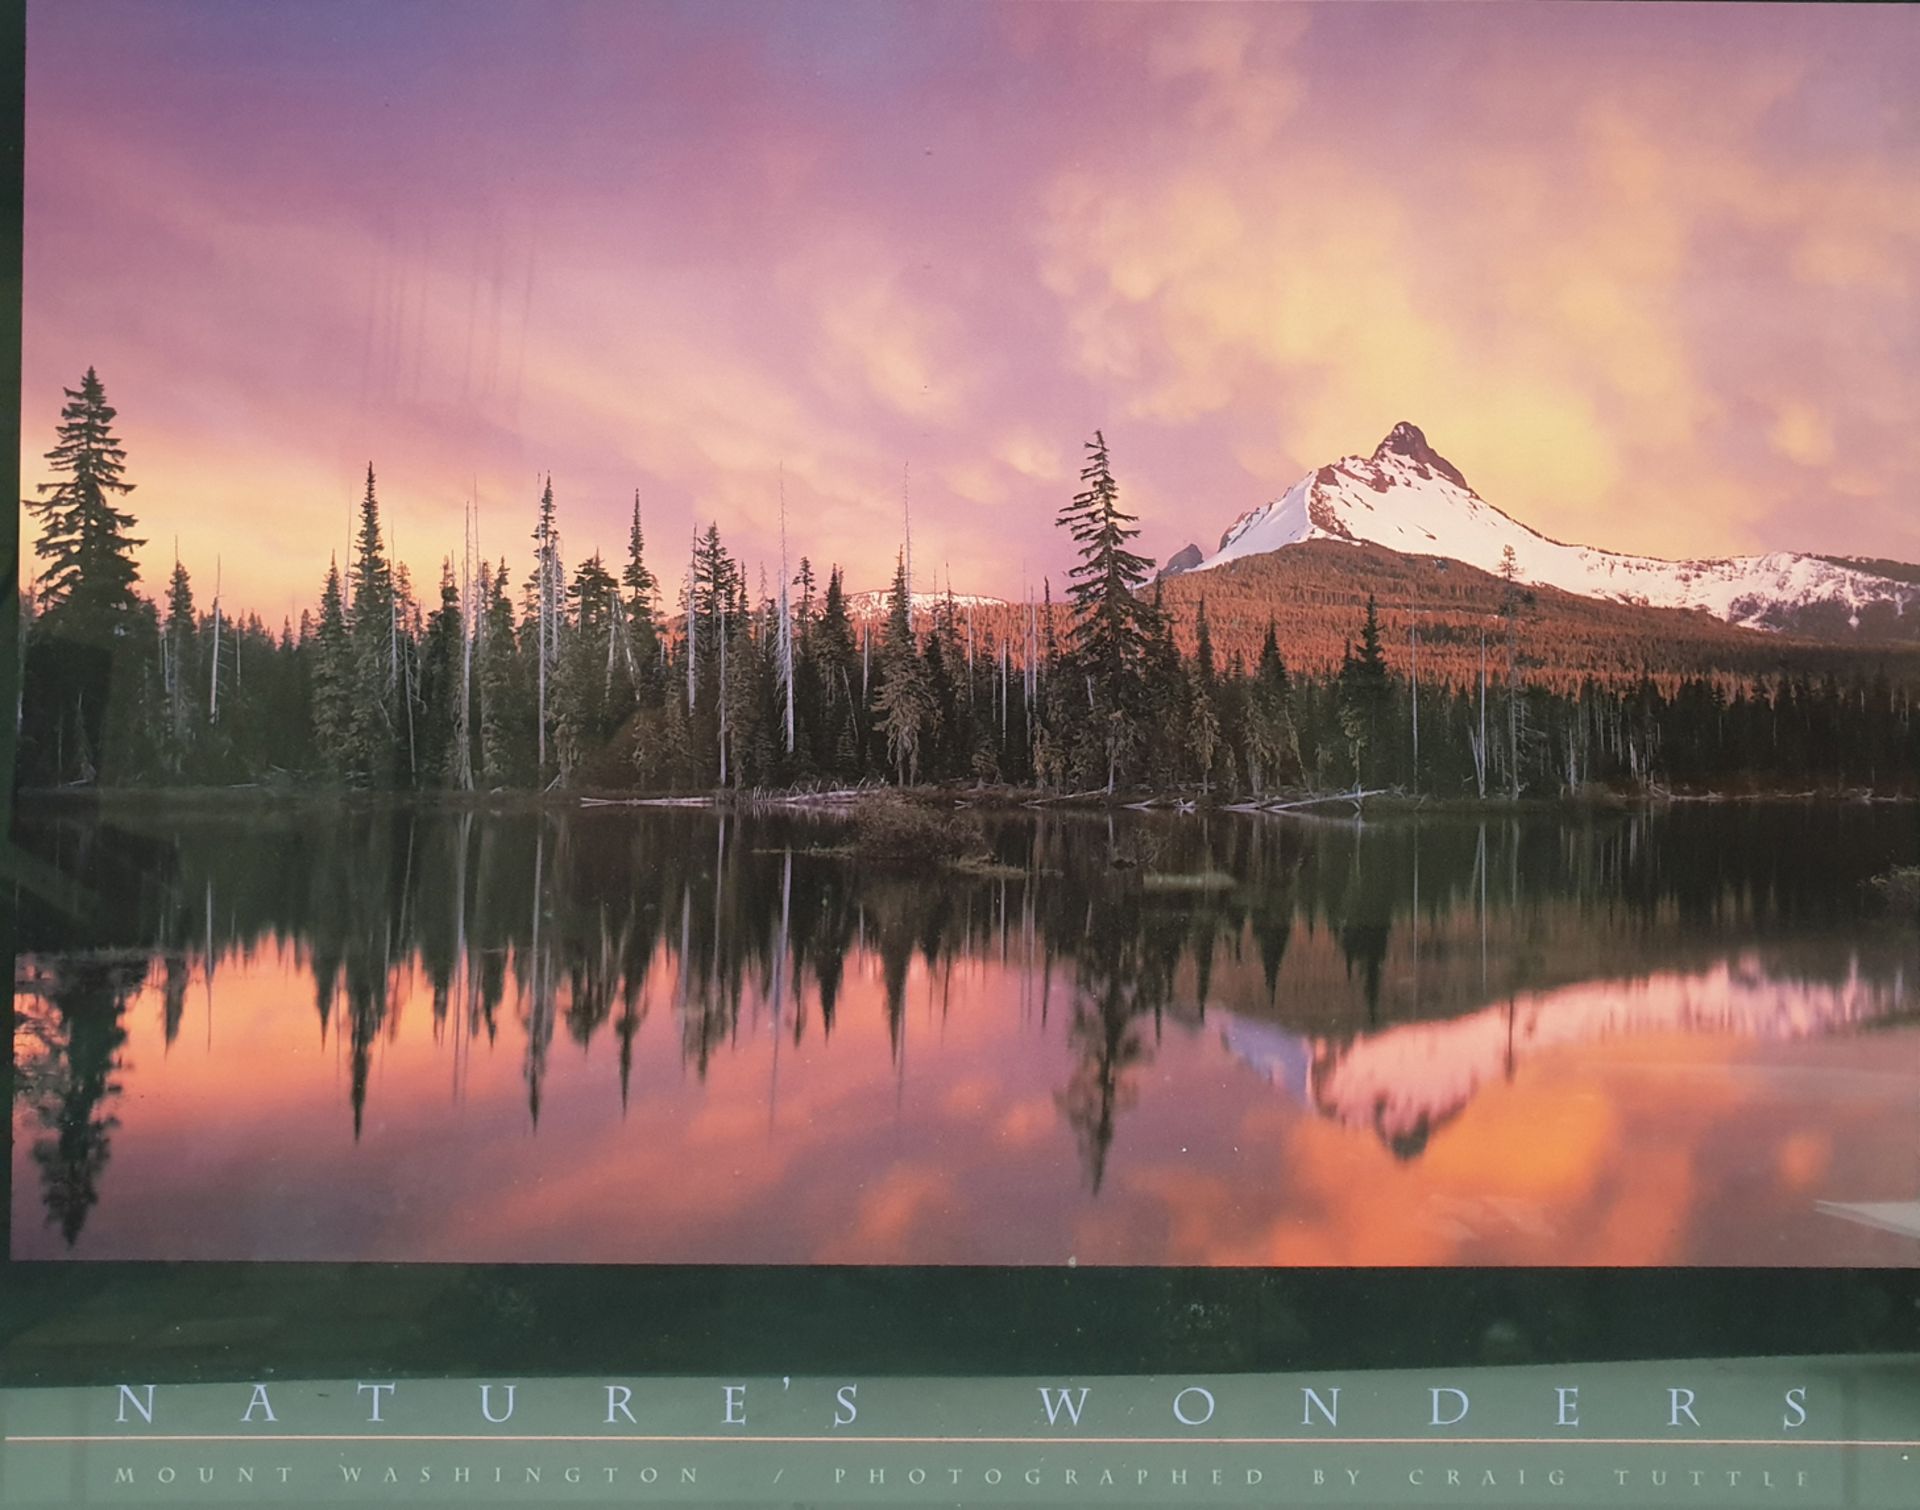 NATURES WONDERS' Mount Washington Photographed by Craig Tuttle Framed Picture. - Image 2 of 3